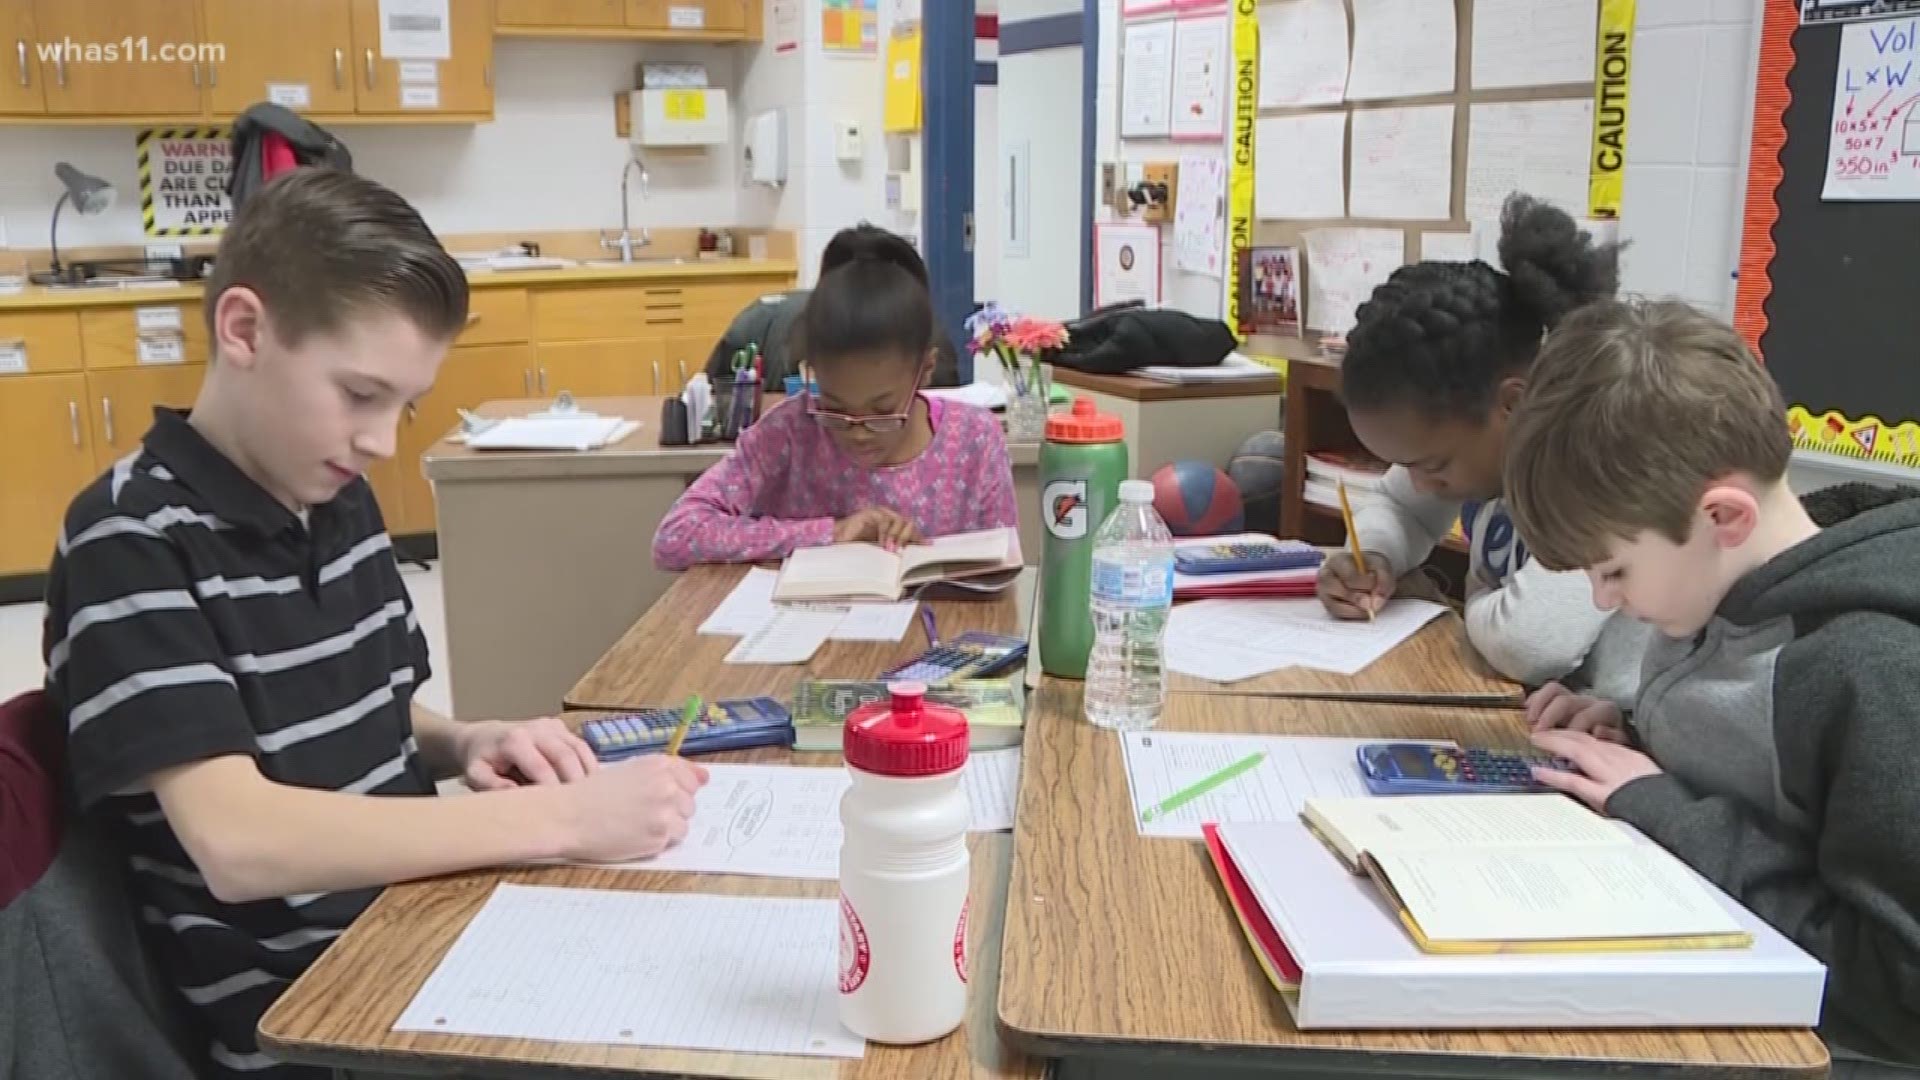 While Kentucky education officials are launching a recruitment campaign to bring in more teachers, officials with JCPS said they'll be staffed and ready to go for the first day of school.